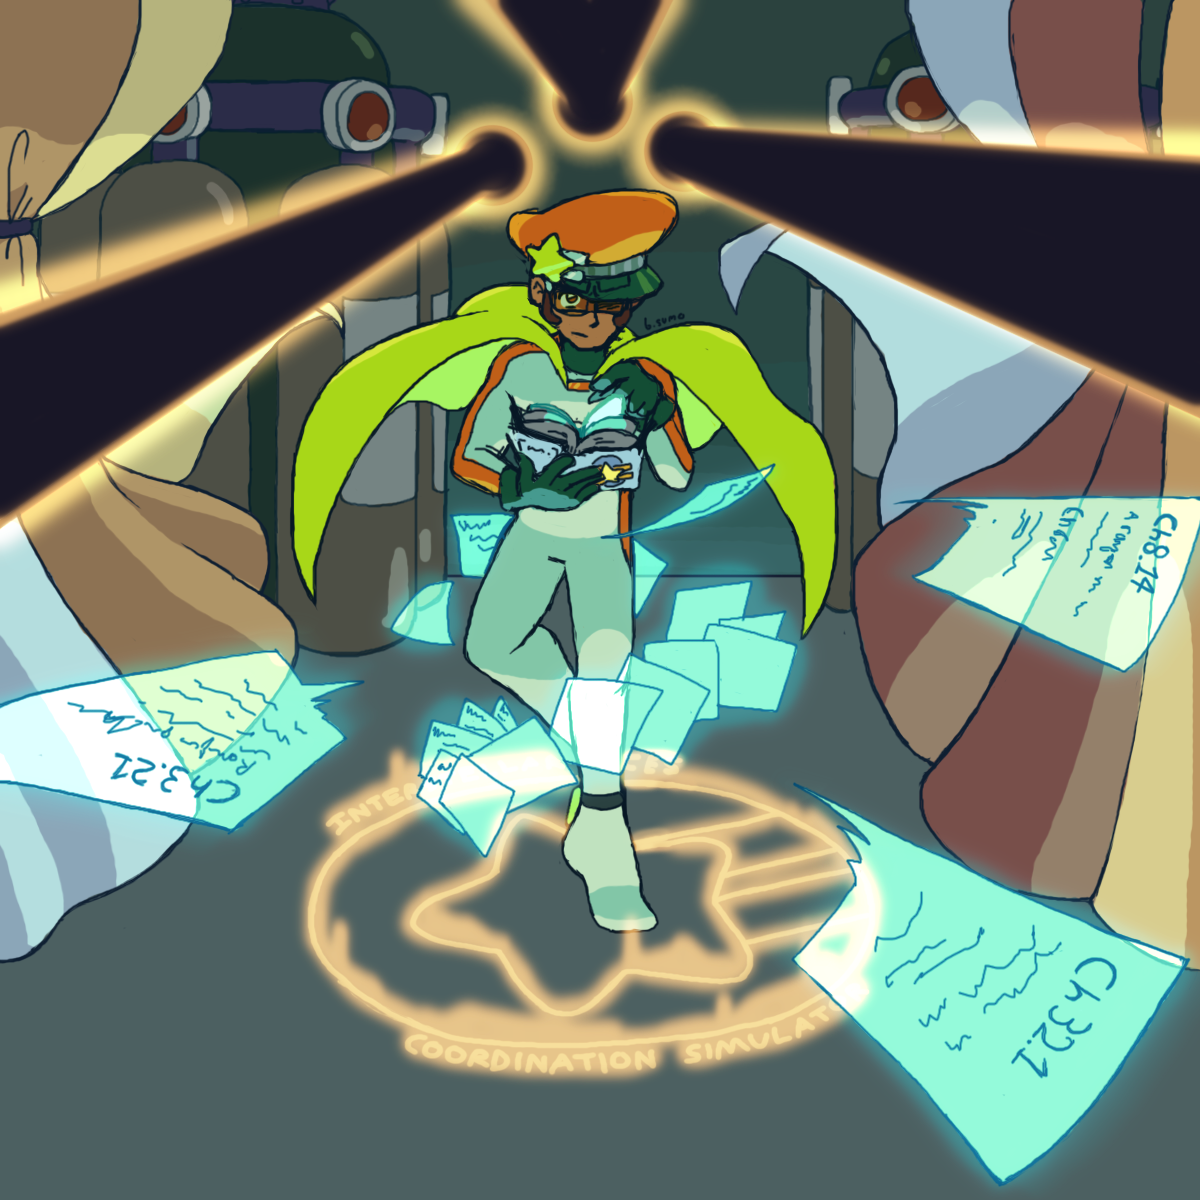 Captain Galhardo flipping through his handbook, surrounded by the pages and dark lasers. The fabrics surround him on either side. Behind him is a wall with tanks. Underneath him is a glowing logo of the Interstellar Forces Coordination Simulator.